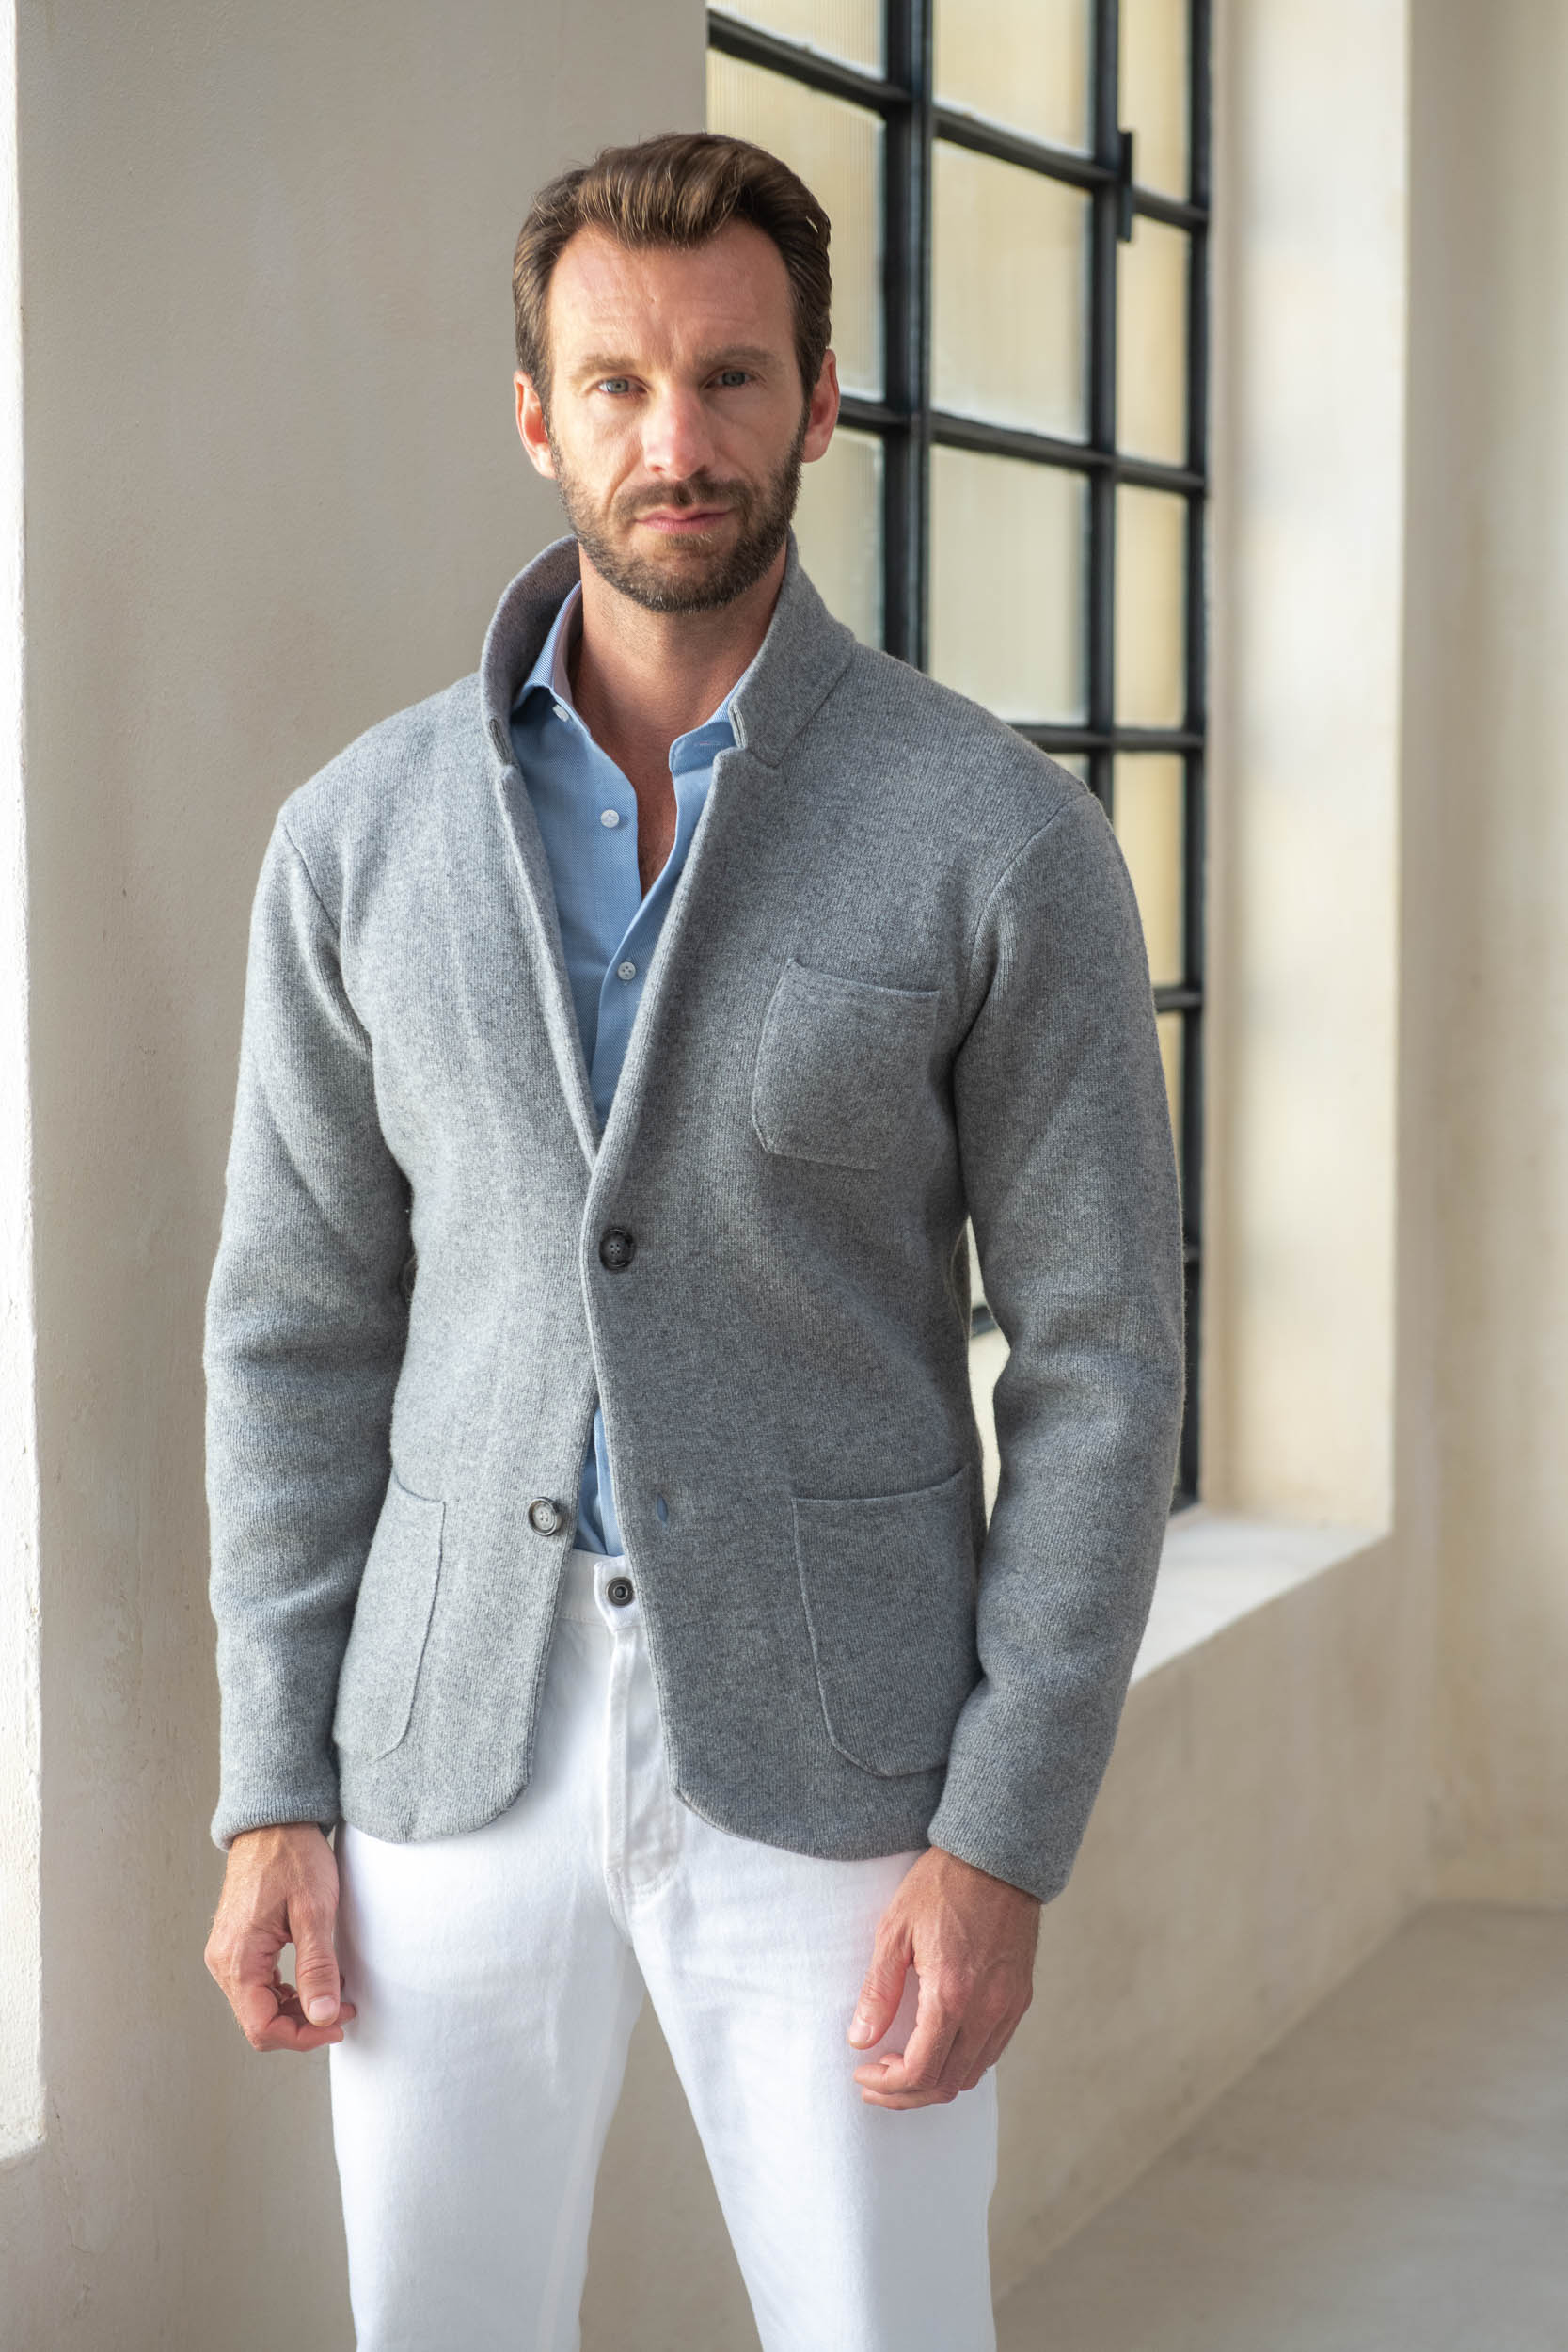 grey knitted jacket, wool knitted jacket for men, grey wool knitted jacket for men, veste en maille, veste en maille grise pour homme,Italian Jacket, Veste Italienne, Giacca Italiana